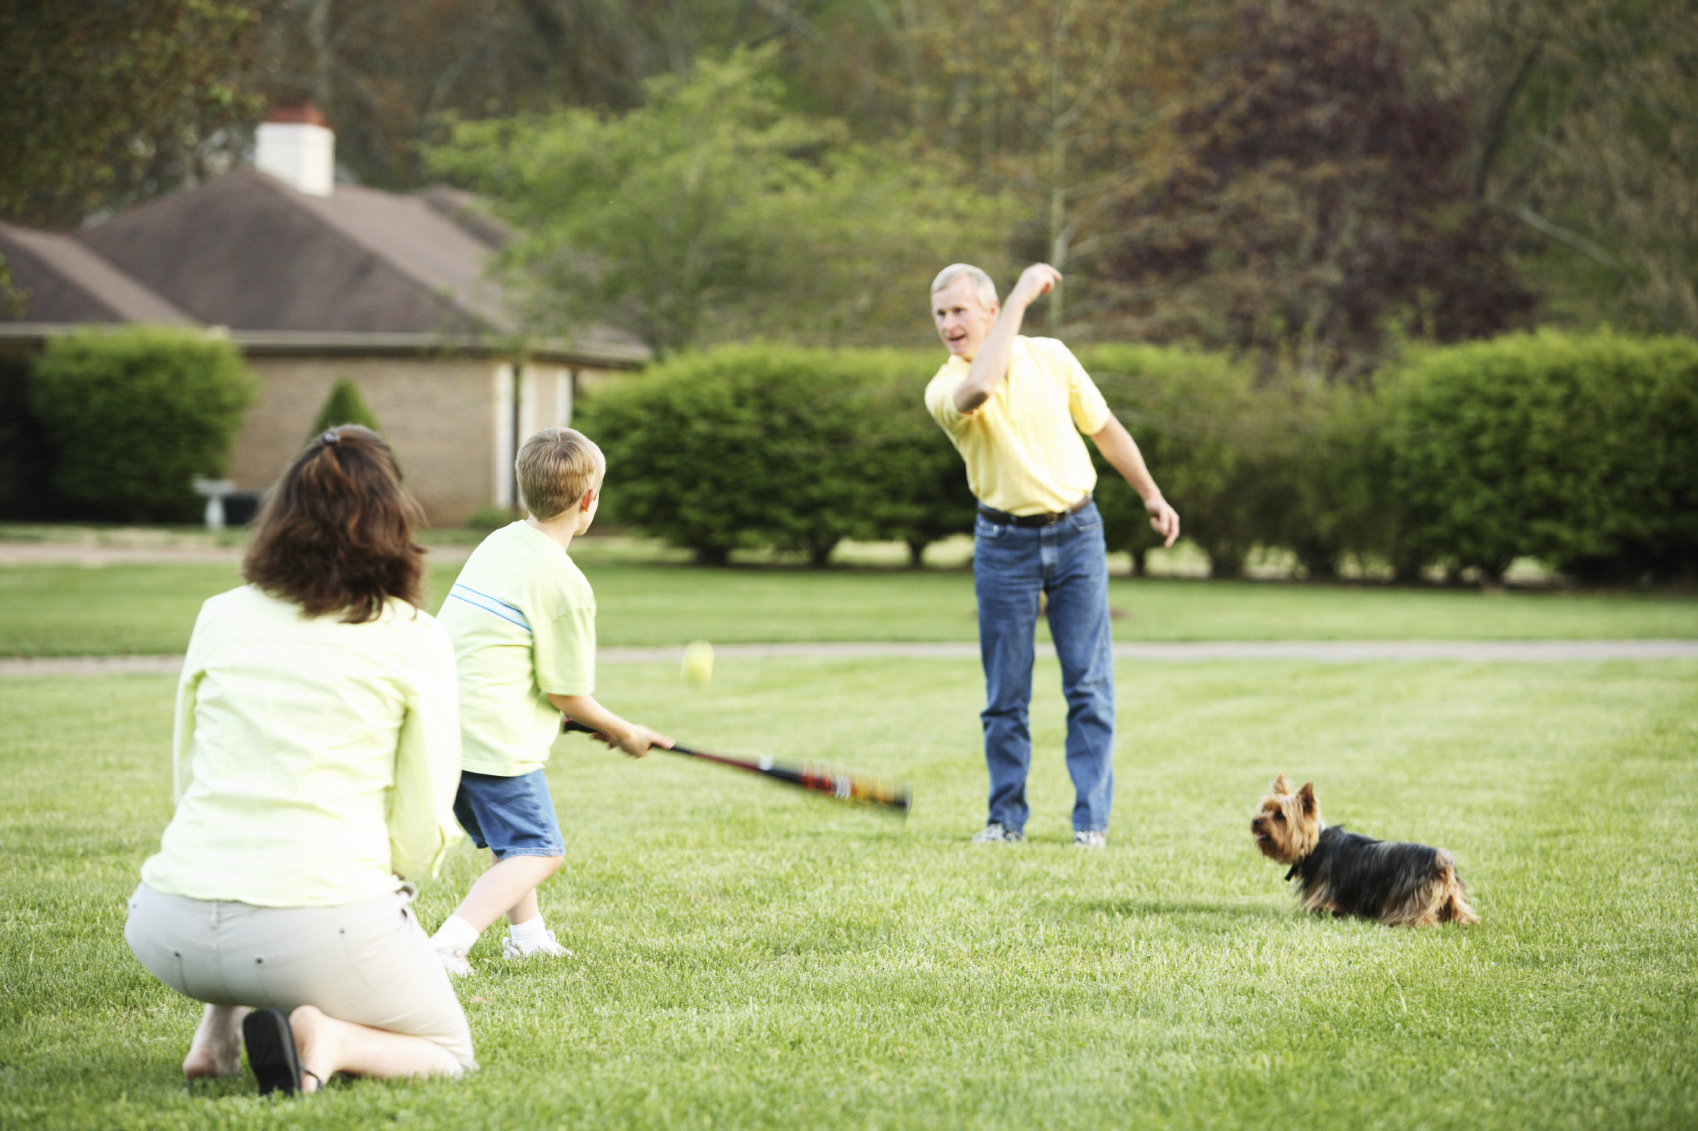 Family (father, mother, son, and pet dog) playing baseball in the yard